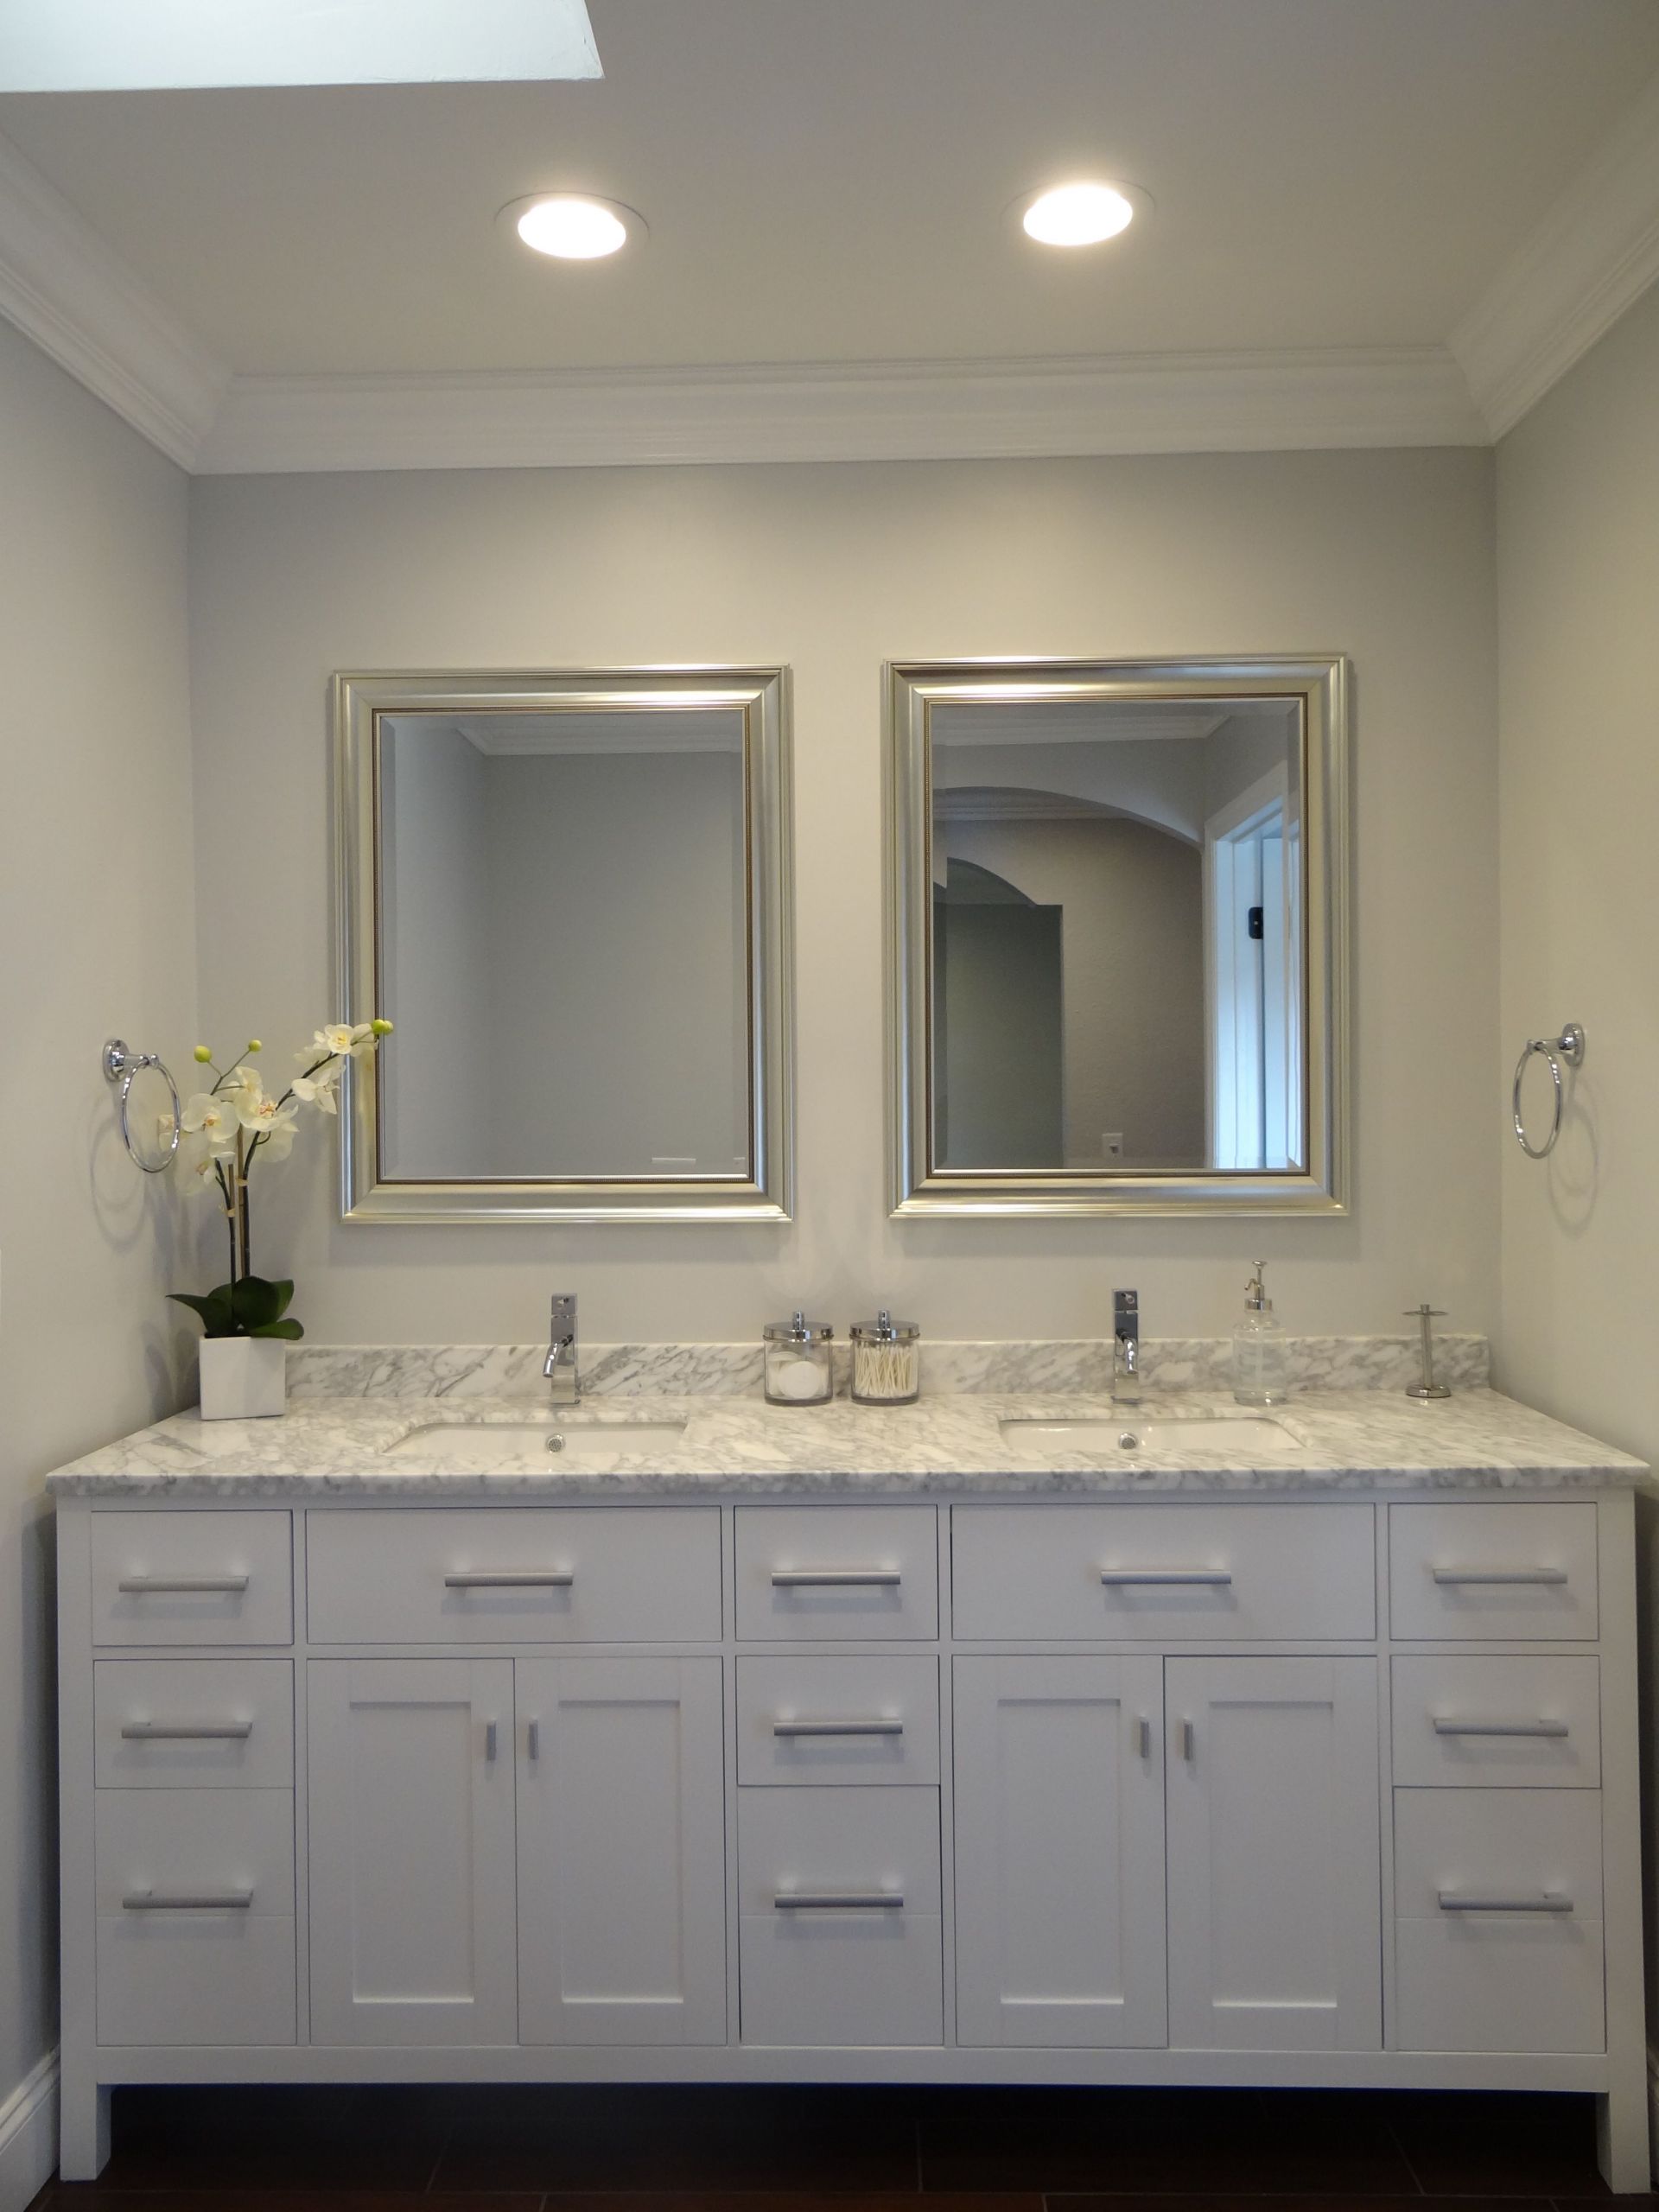 Master Bathroom Paint Colors
 Master bathroom suite with double vanity and Sherwin